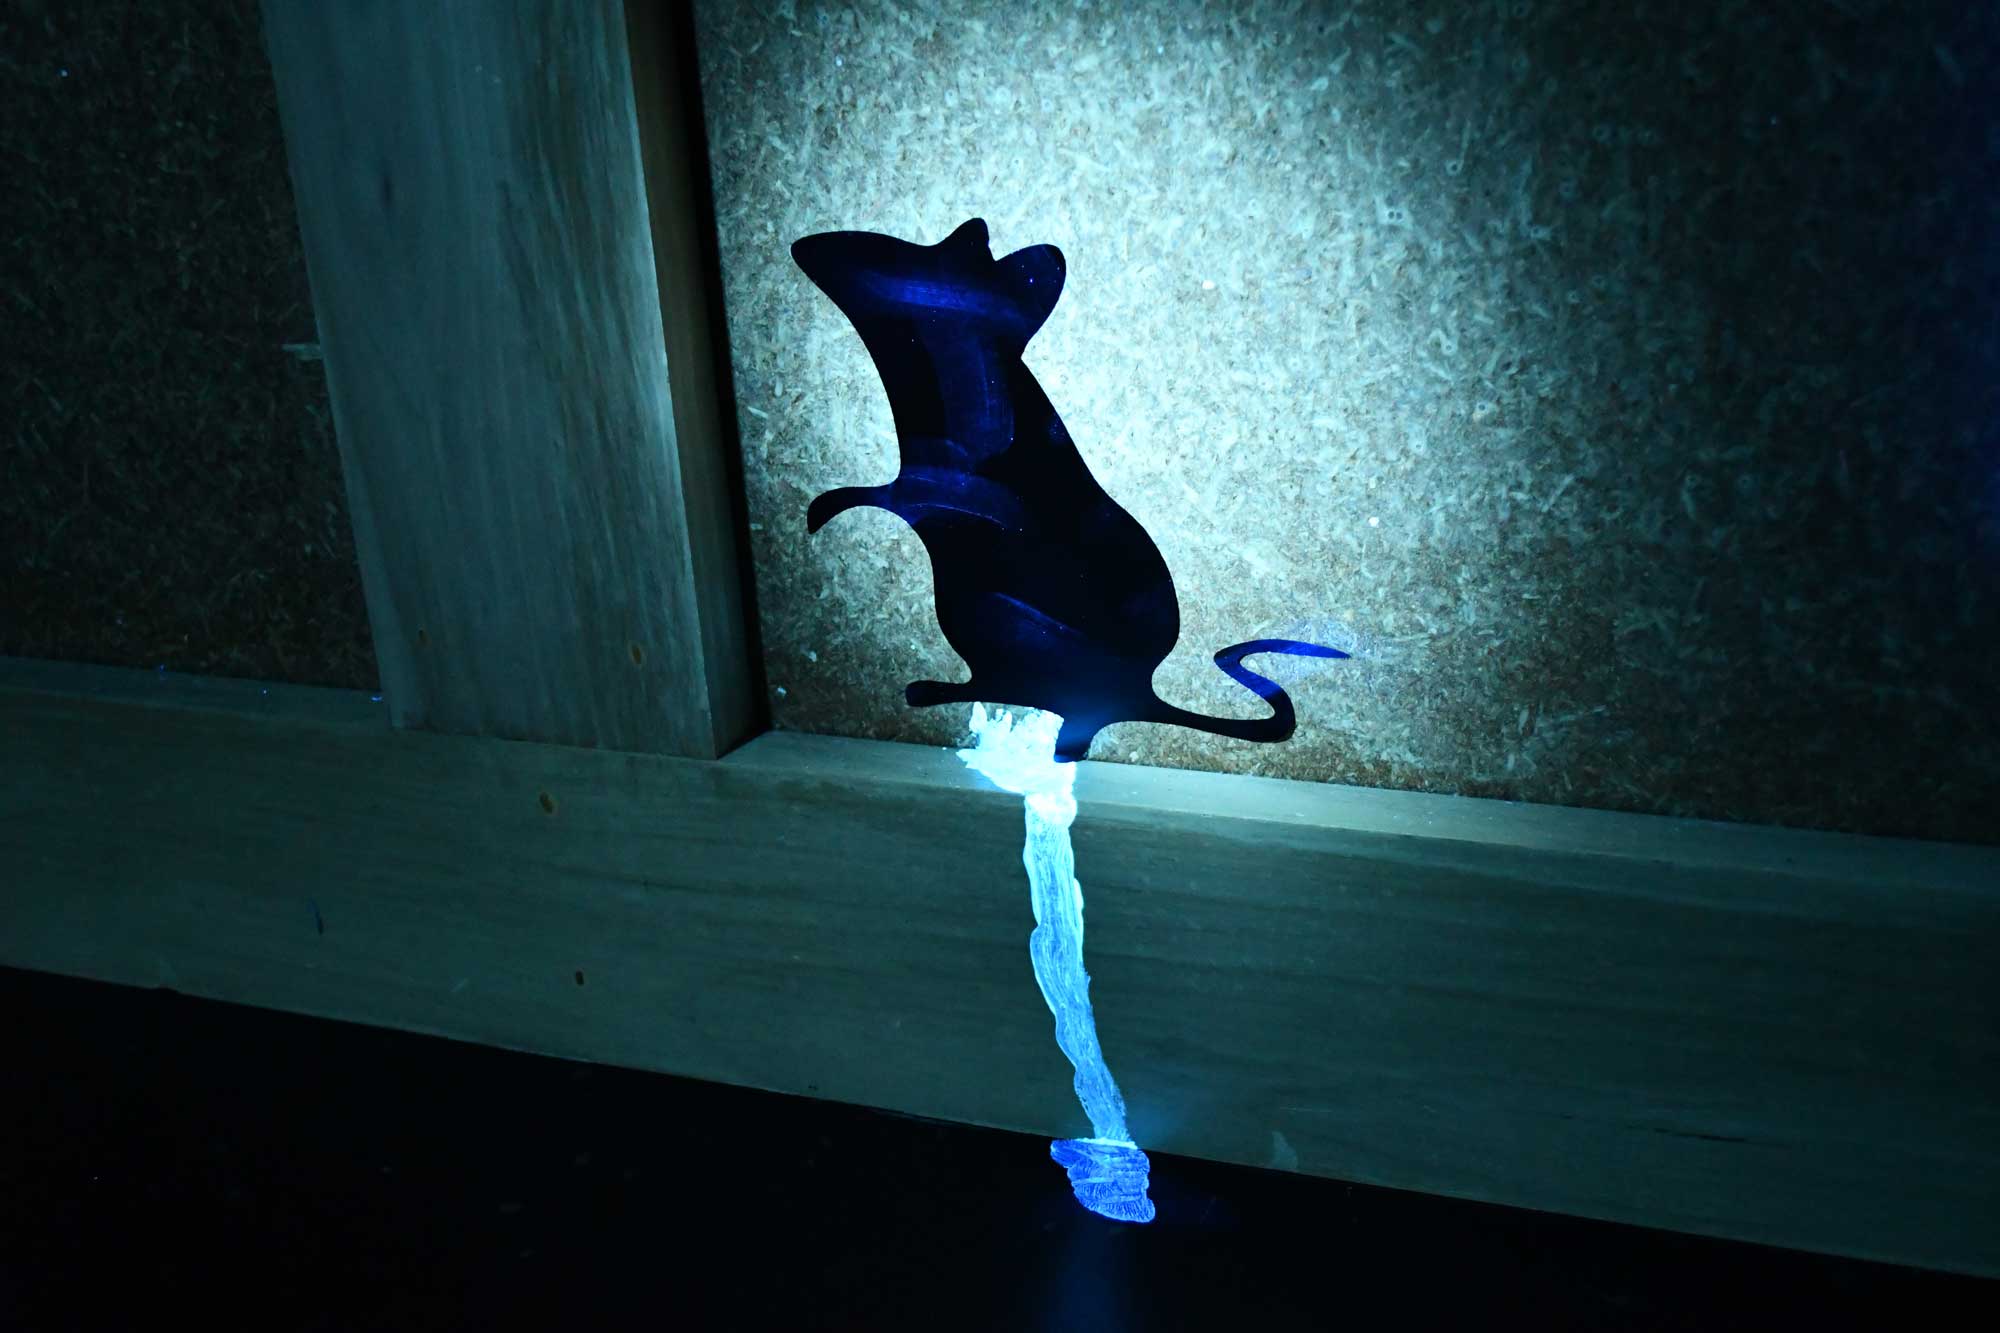 A mouse is illuminated by UV light.